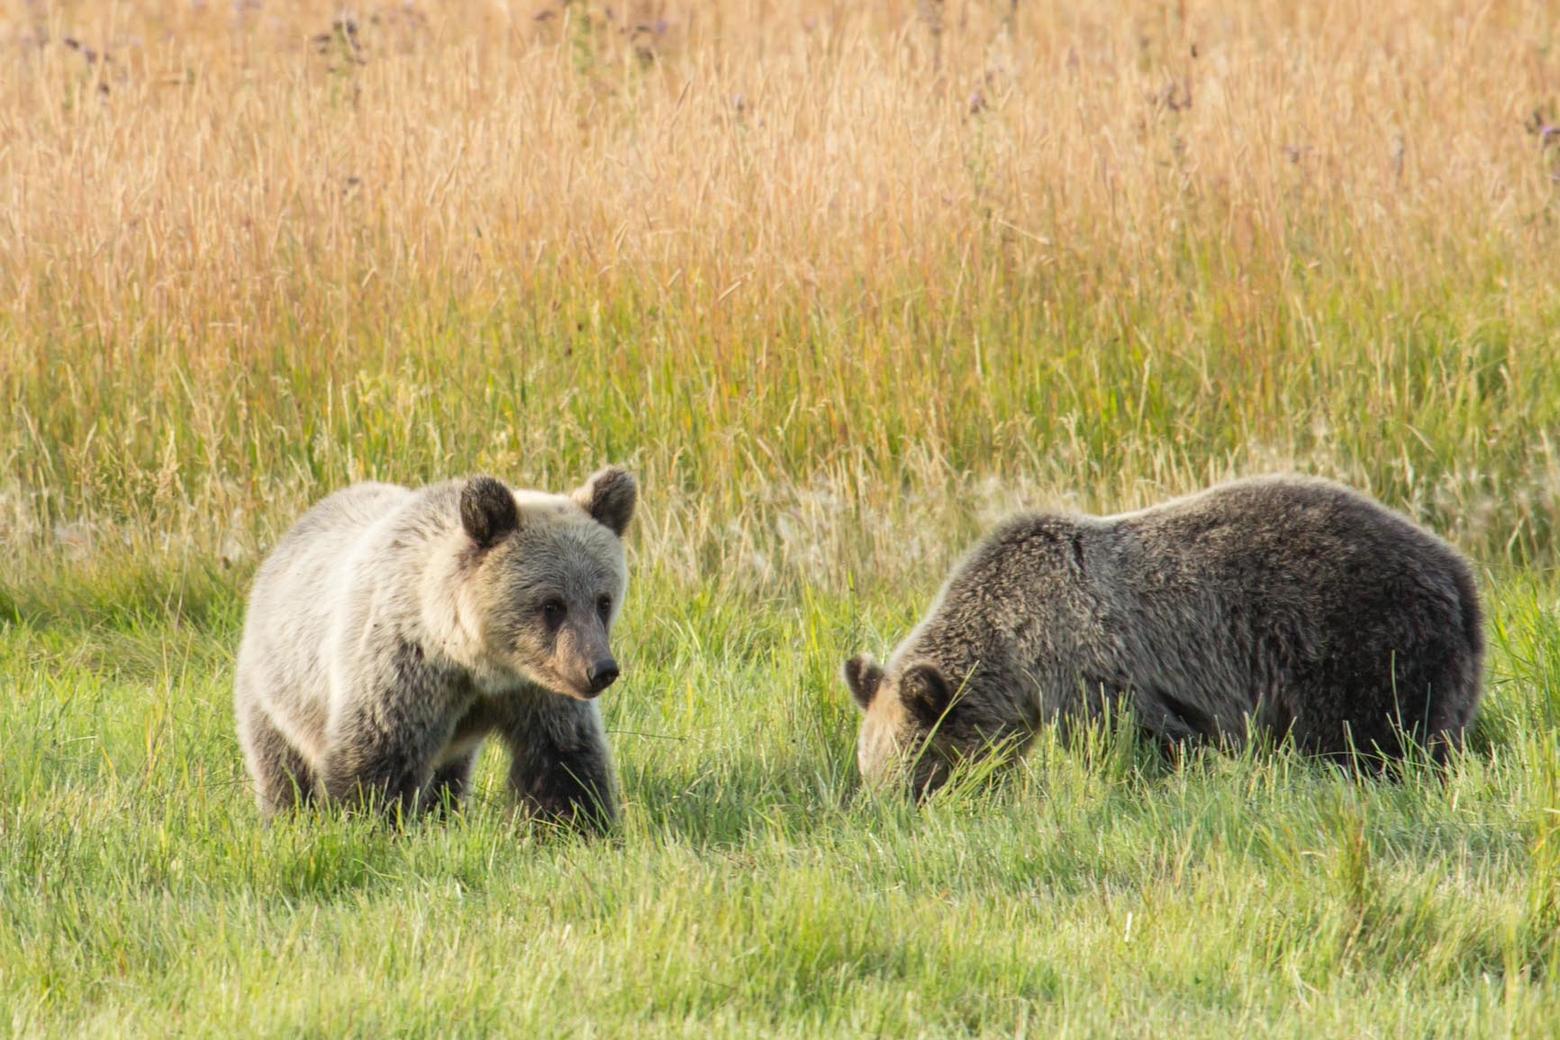 After their mother was shot in the vicintity of Tom Miner Basin, these orphaned and vulnerable young grizzly sisters miraculously denned and survived a long winter only to be euthanized by state officials when they wandered into developed areas in Paradise Valley. Their lethal outcome was controversial but it also speaks to the nuanced challenges of co-existence between people and bears. Photo courtesy Brad Orsted